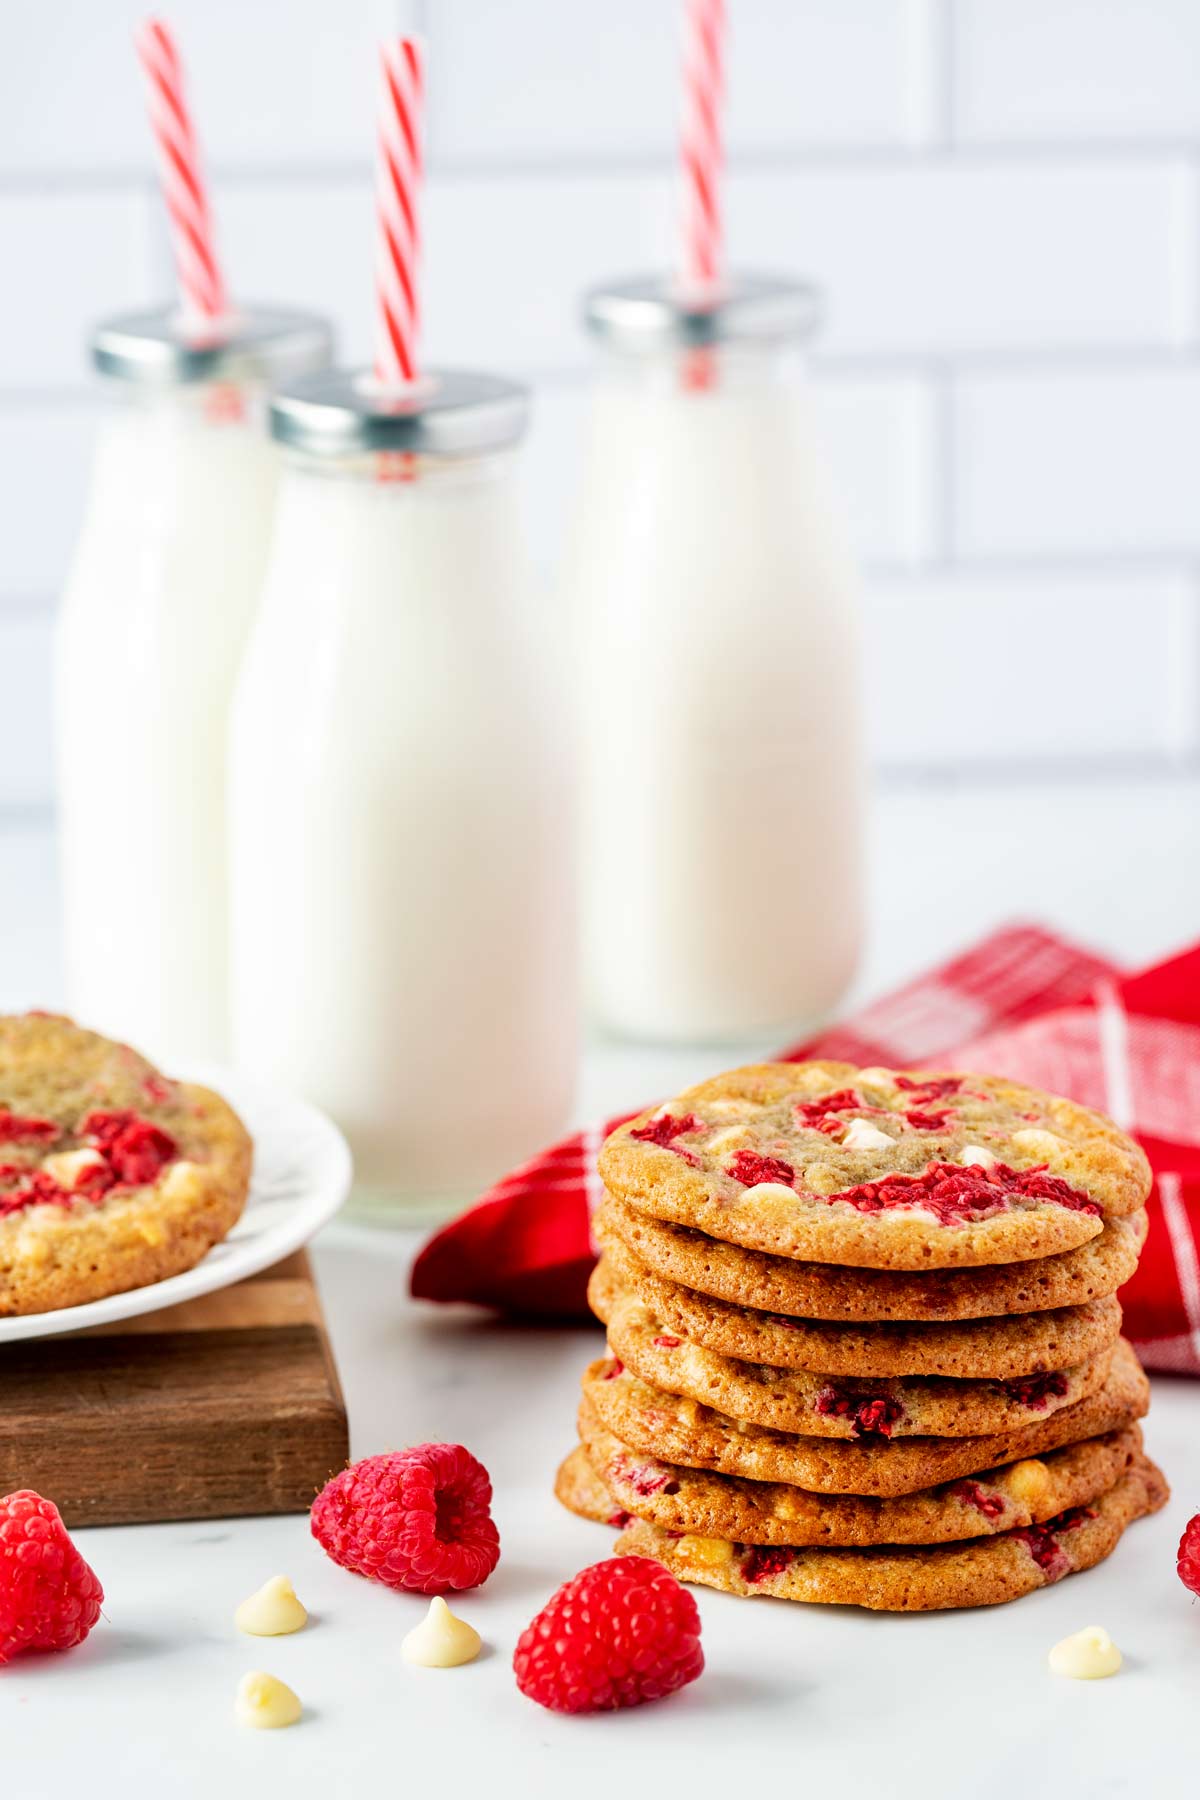 Side photo of a stack of white chocolate raspberry cookies with raspberries and chocolate chips beside it and jars of milk behind it.